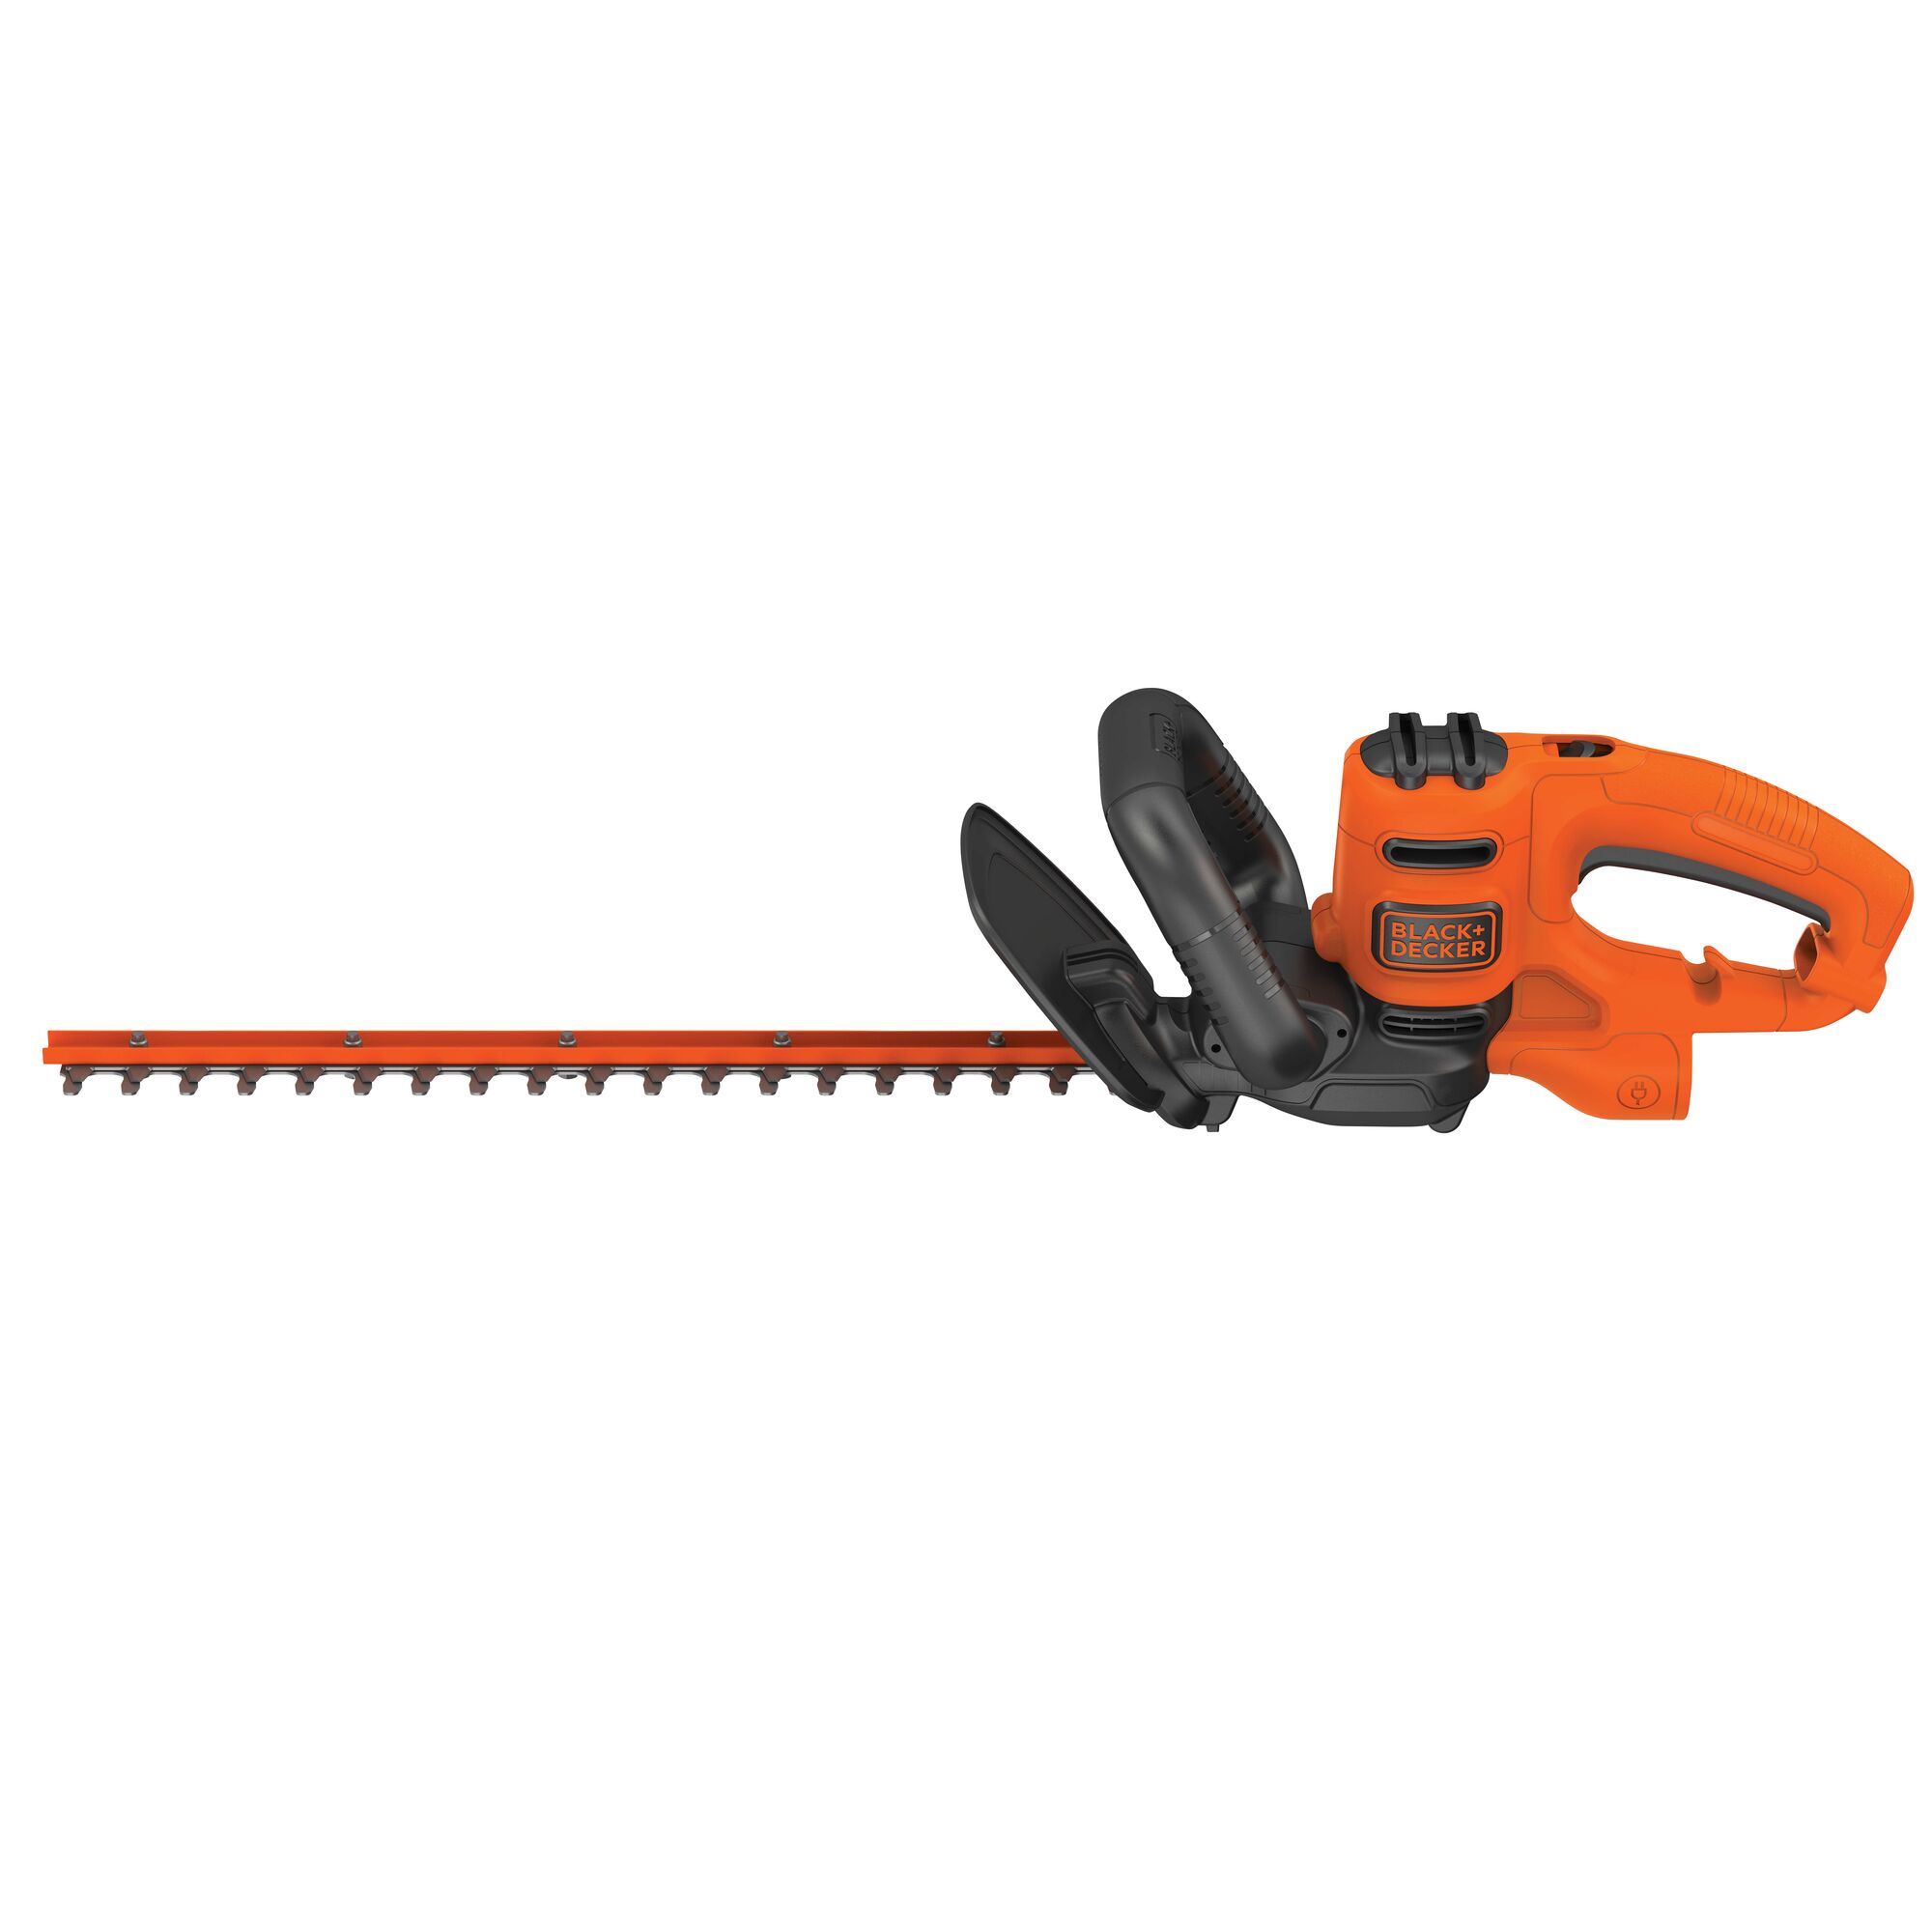 Profile of 18 inch electric hedge trimmer.